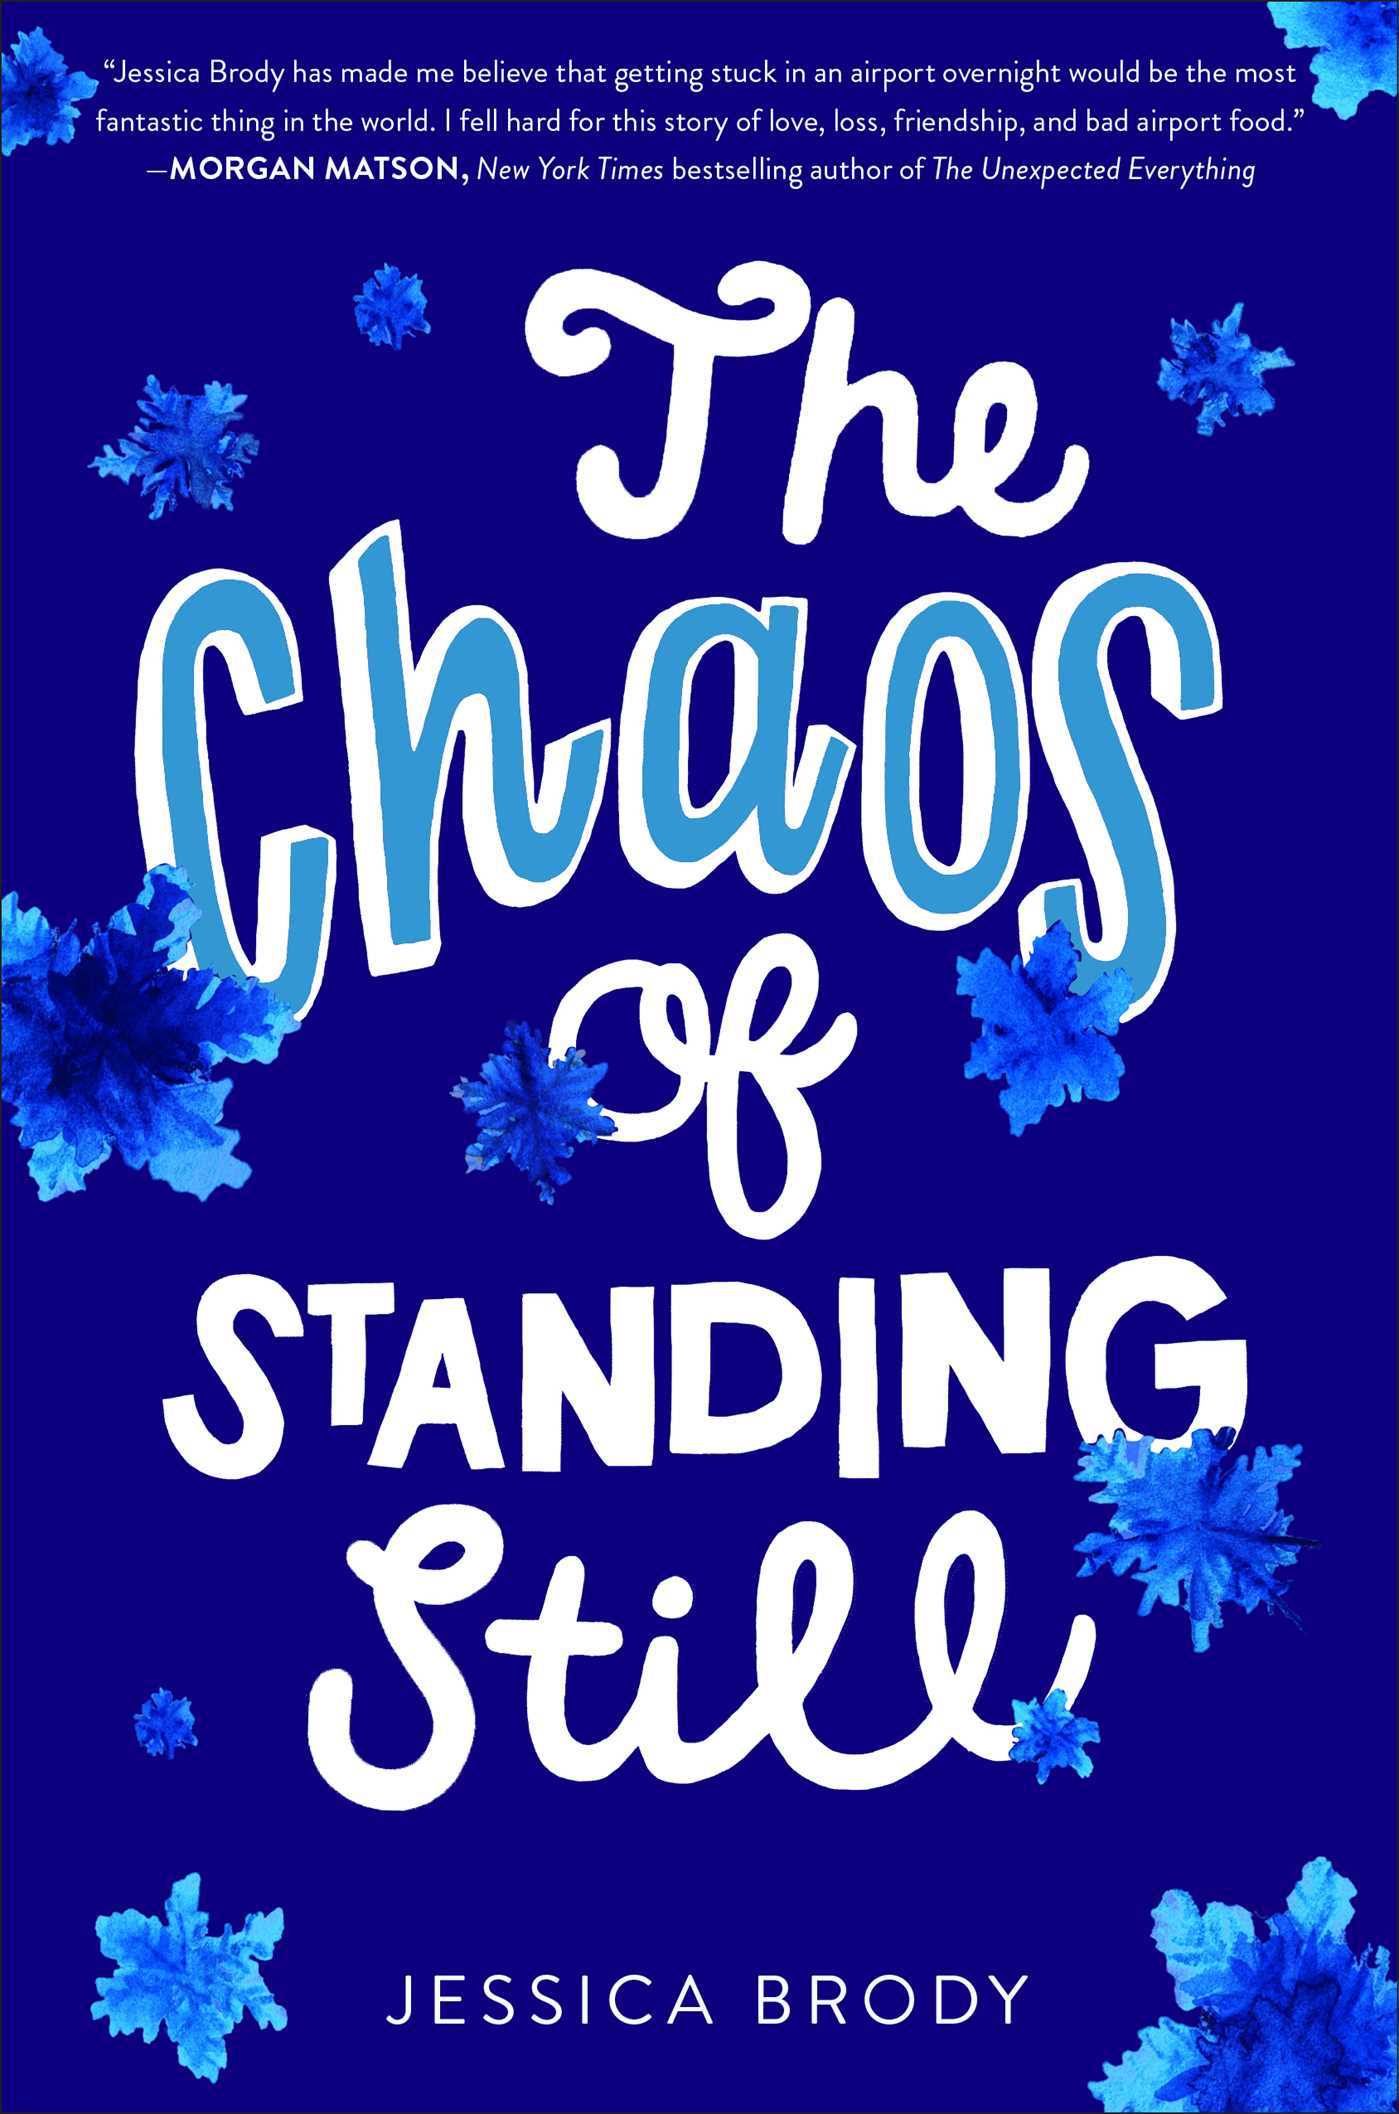 The Chaos of Standing Still 2